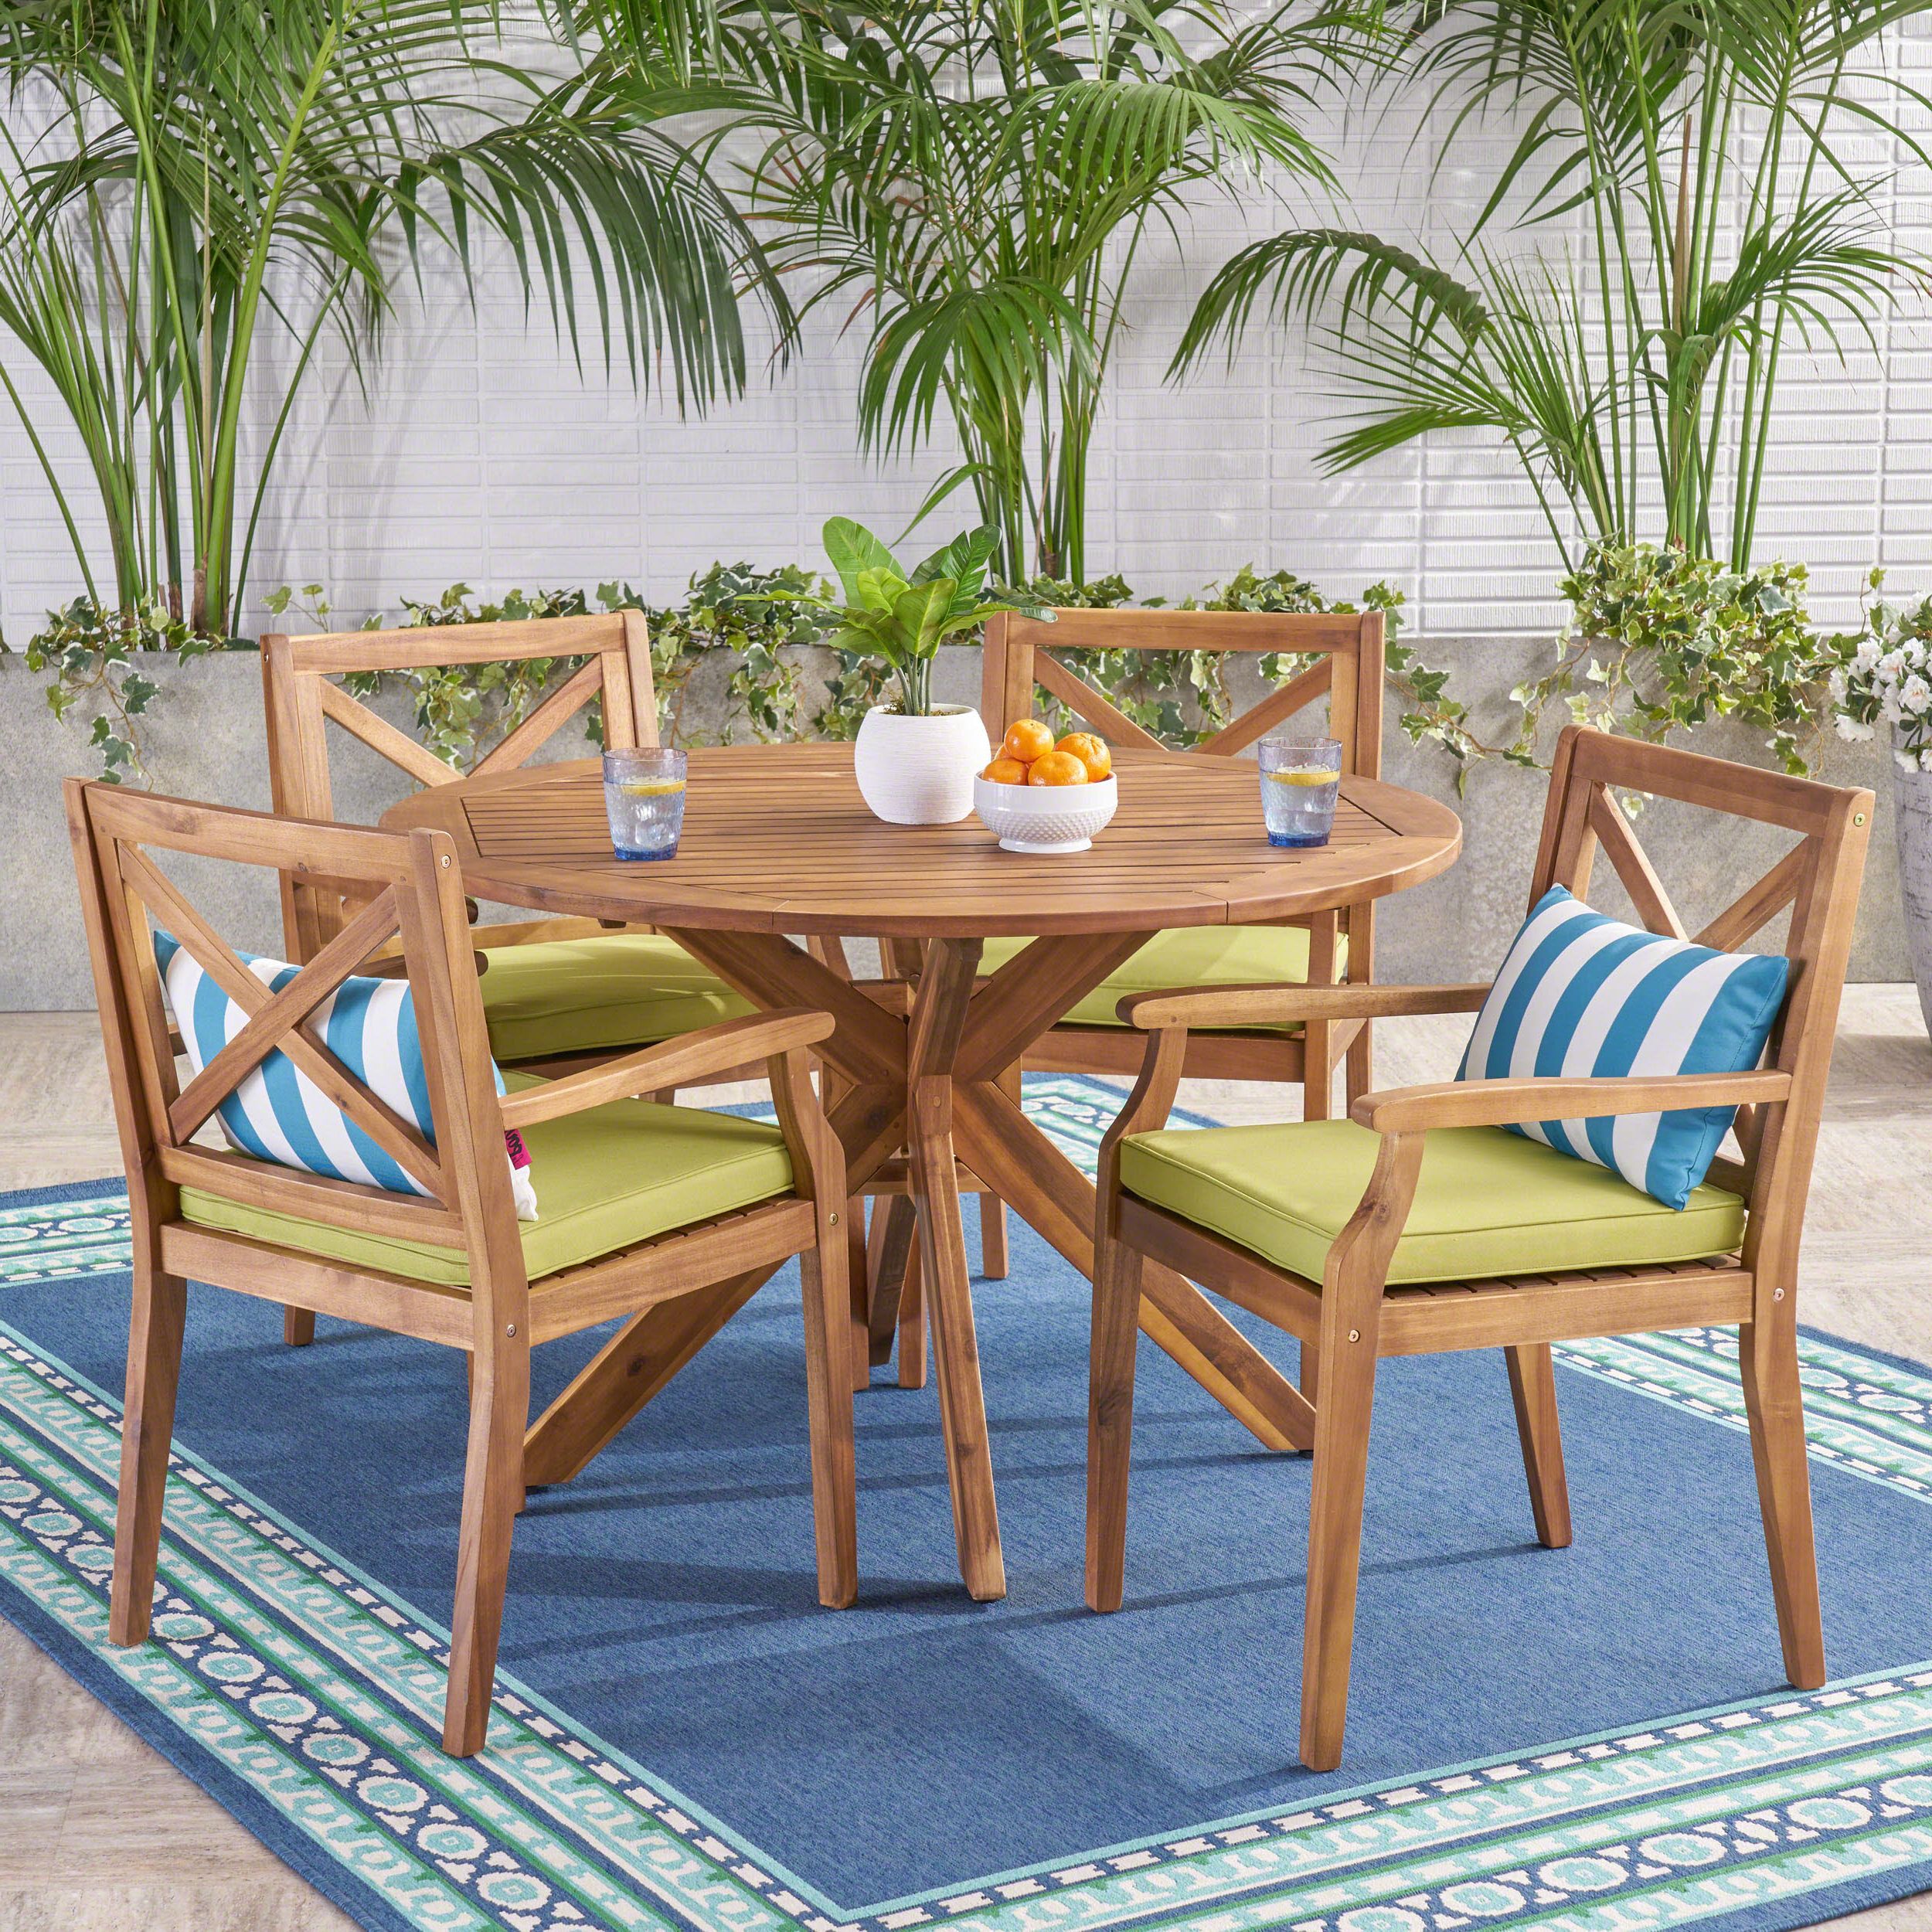 Newest Oakley Outdoor 5 Piece Acacia Wood Round Dining Set With Cushions, Teak Regarding Acacia Wood Outdoor Seating Patio Sets (View 2 of 15)